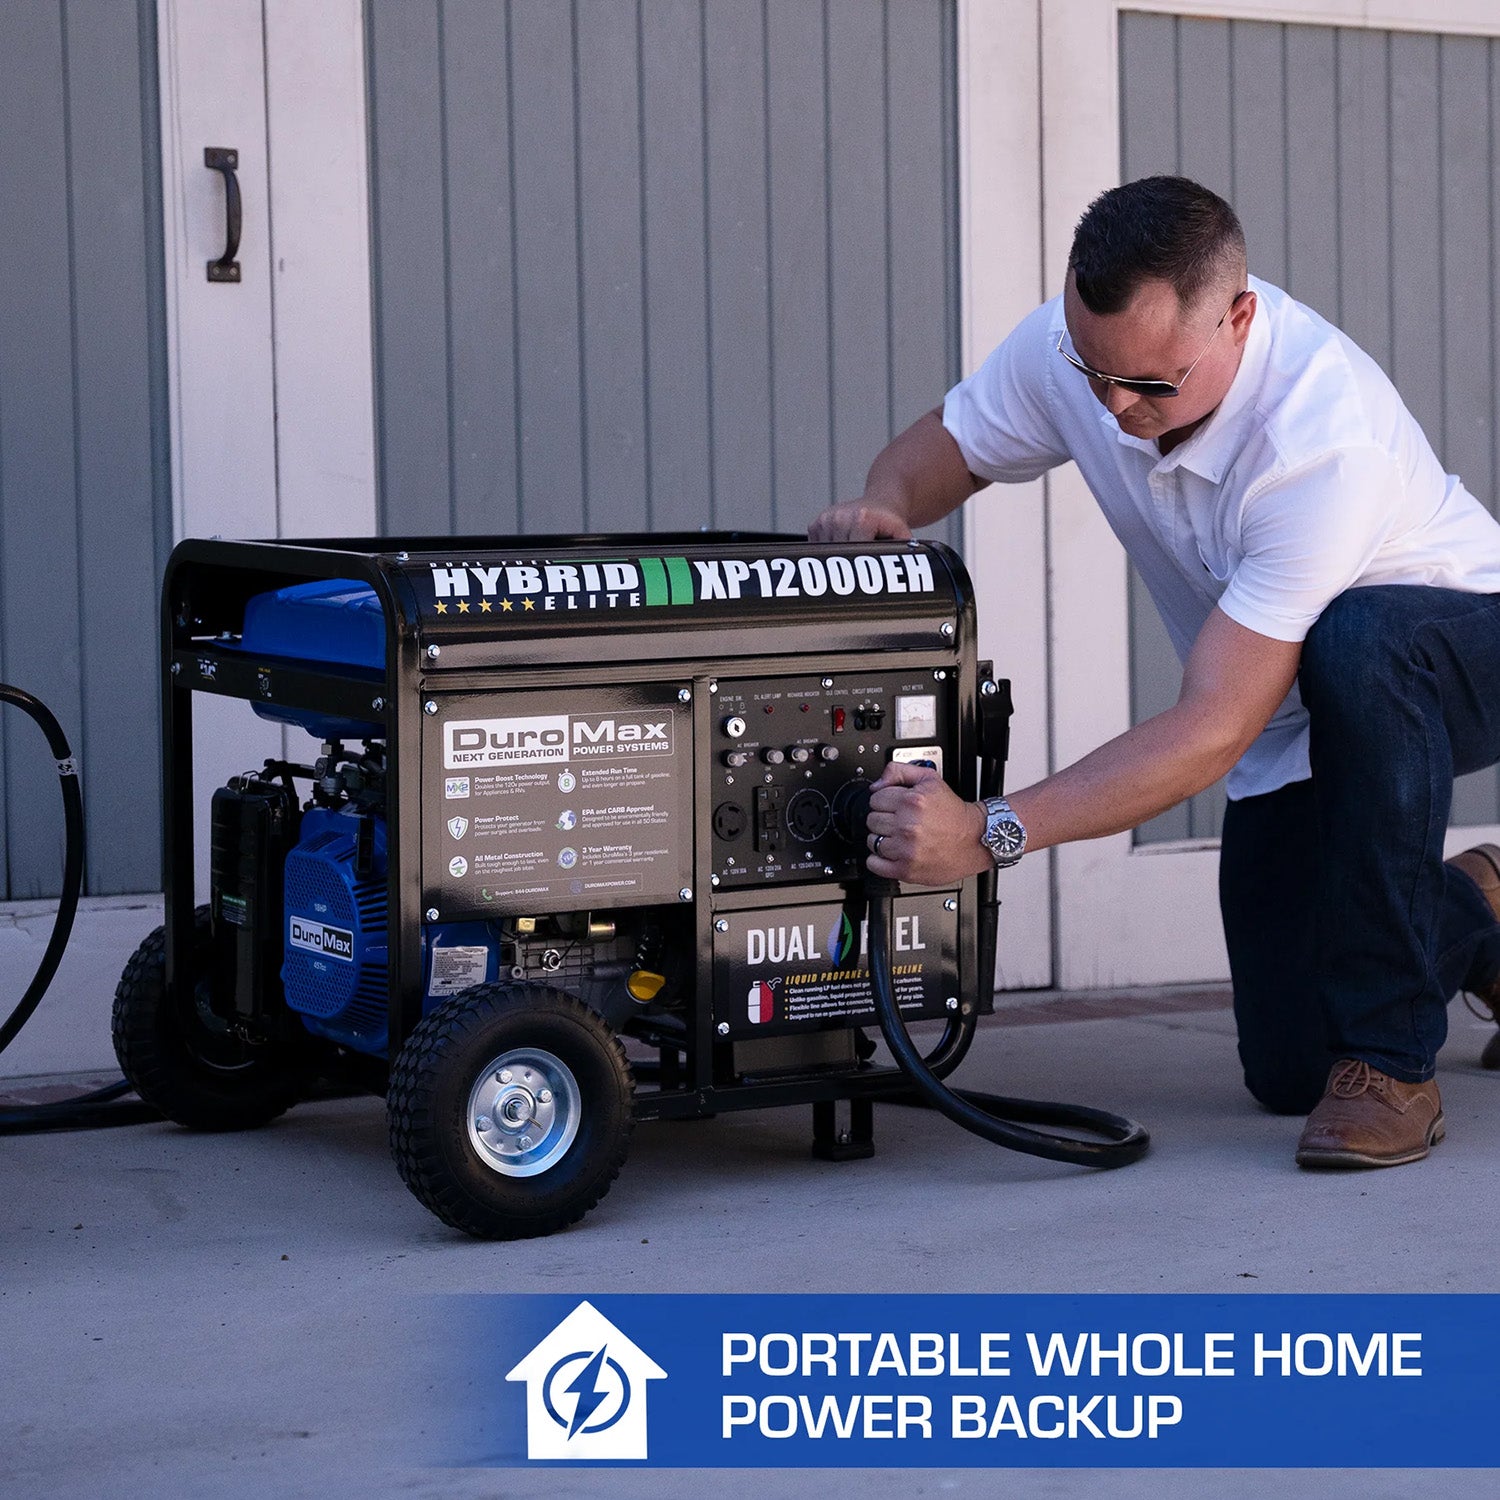 DuroMax XP12000EH Dual Fuel Portable Generator Can Supply Whole Home Power Backup